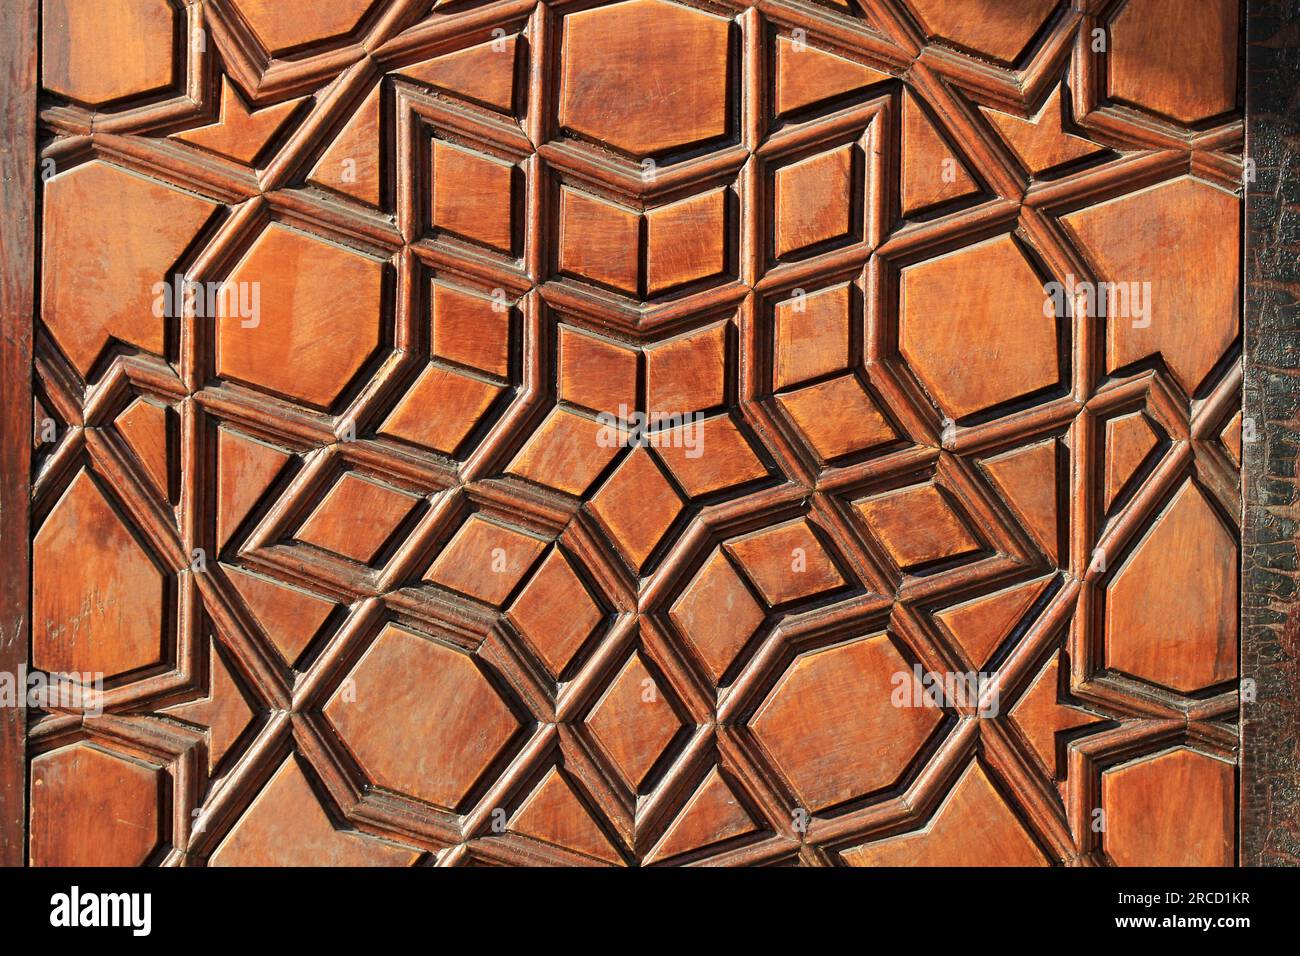 An old handcrafted wooden door. No nails were used in the construction of the door. There are geometric motifs on the door. Stock Photo